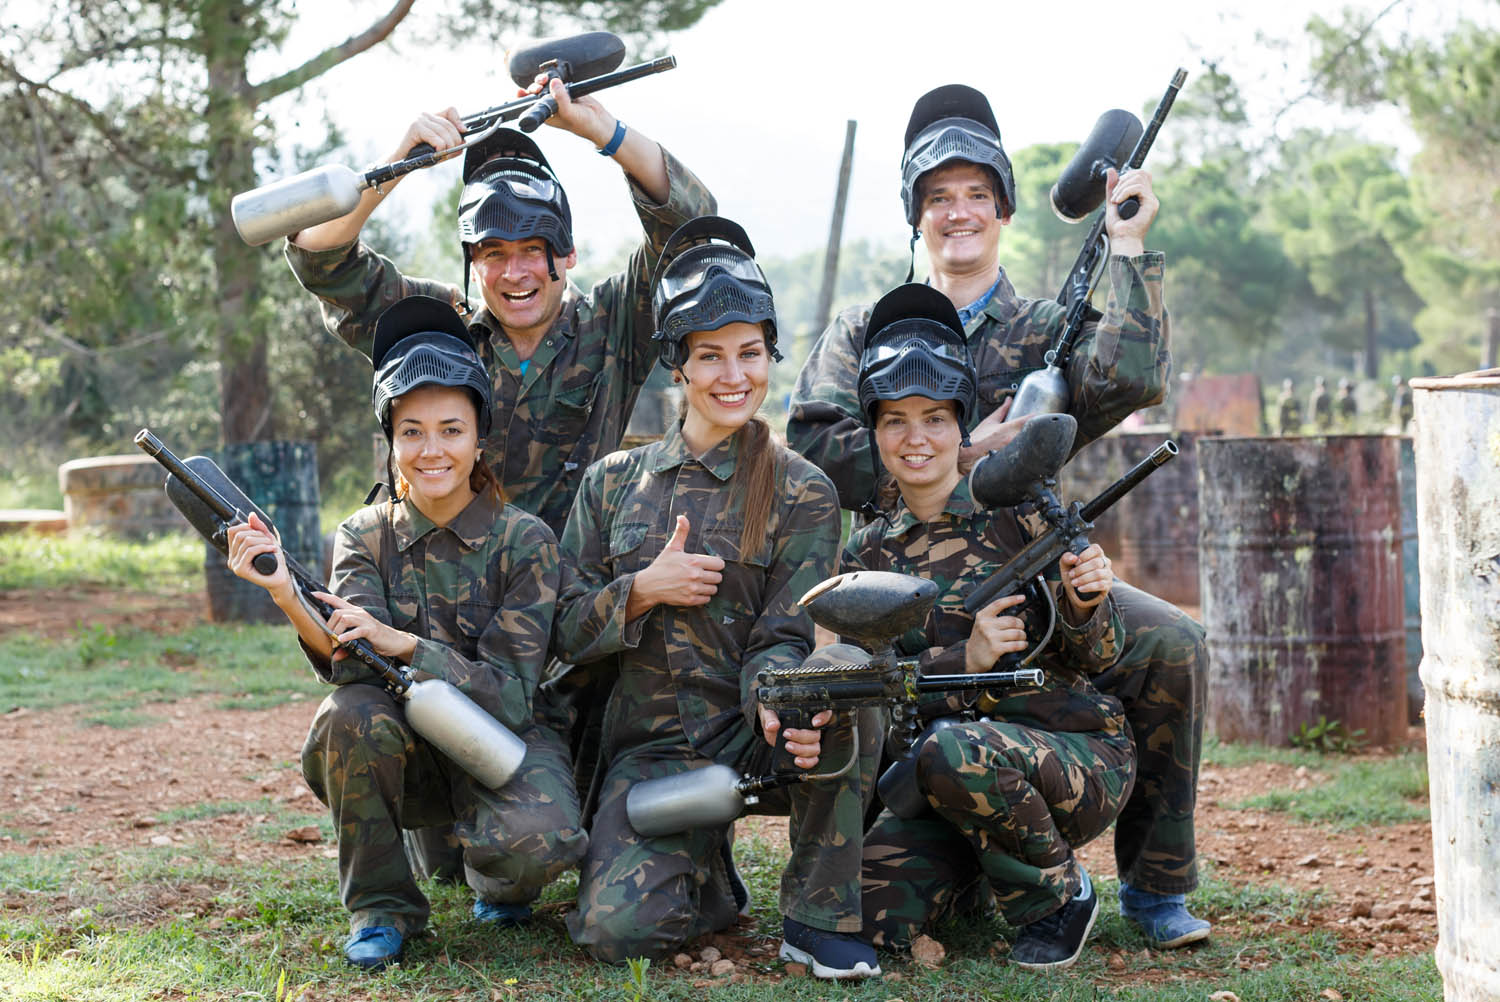 group paintball photo